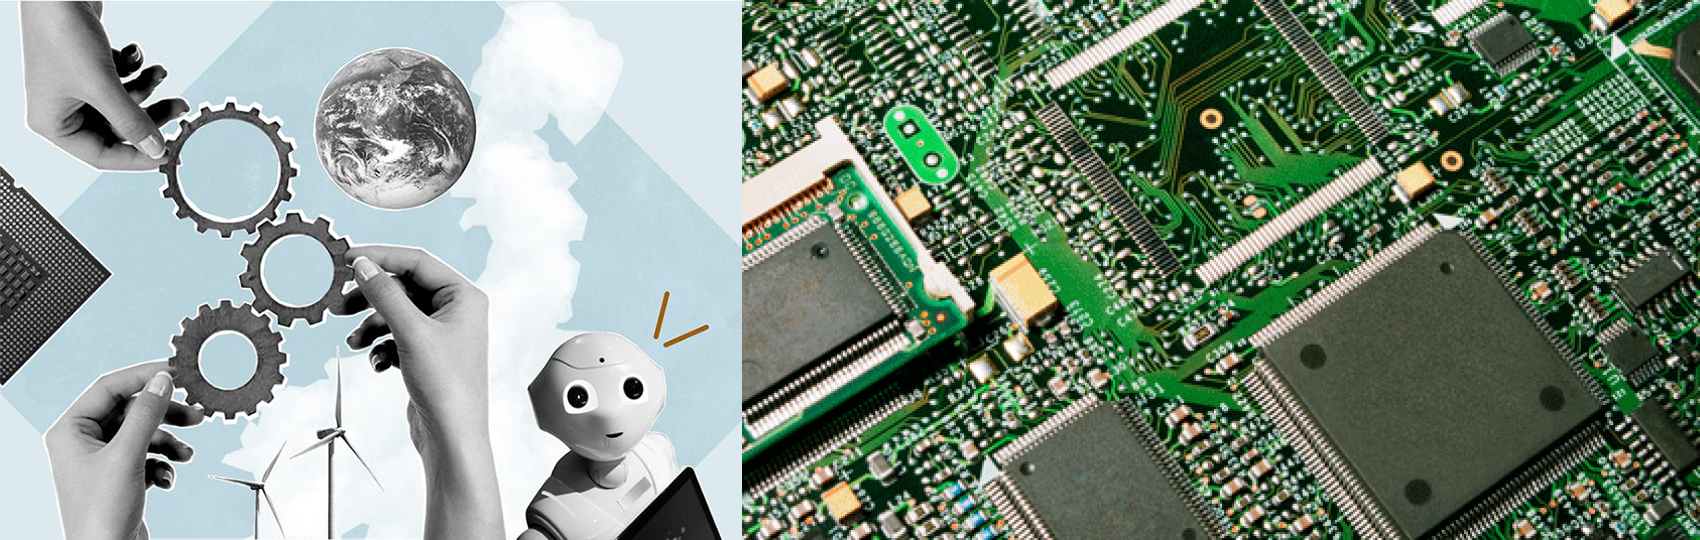 Collage and illustration of electronic chip